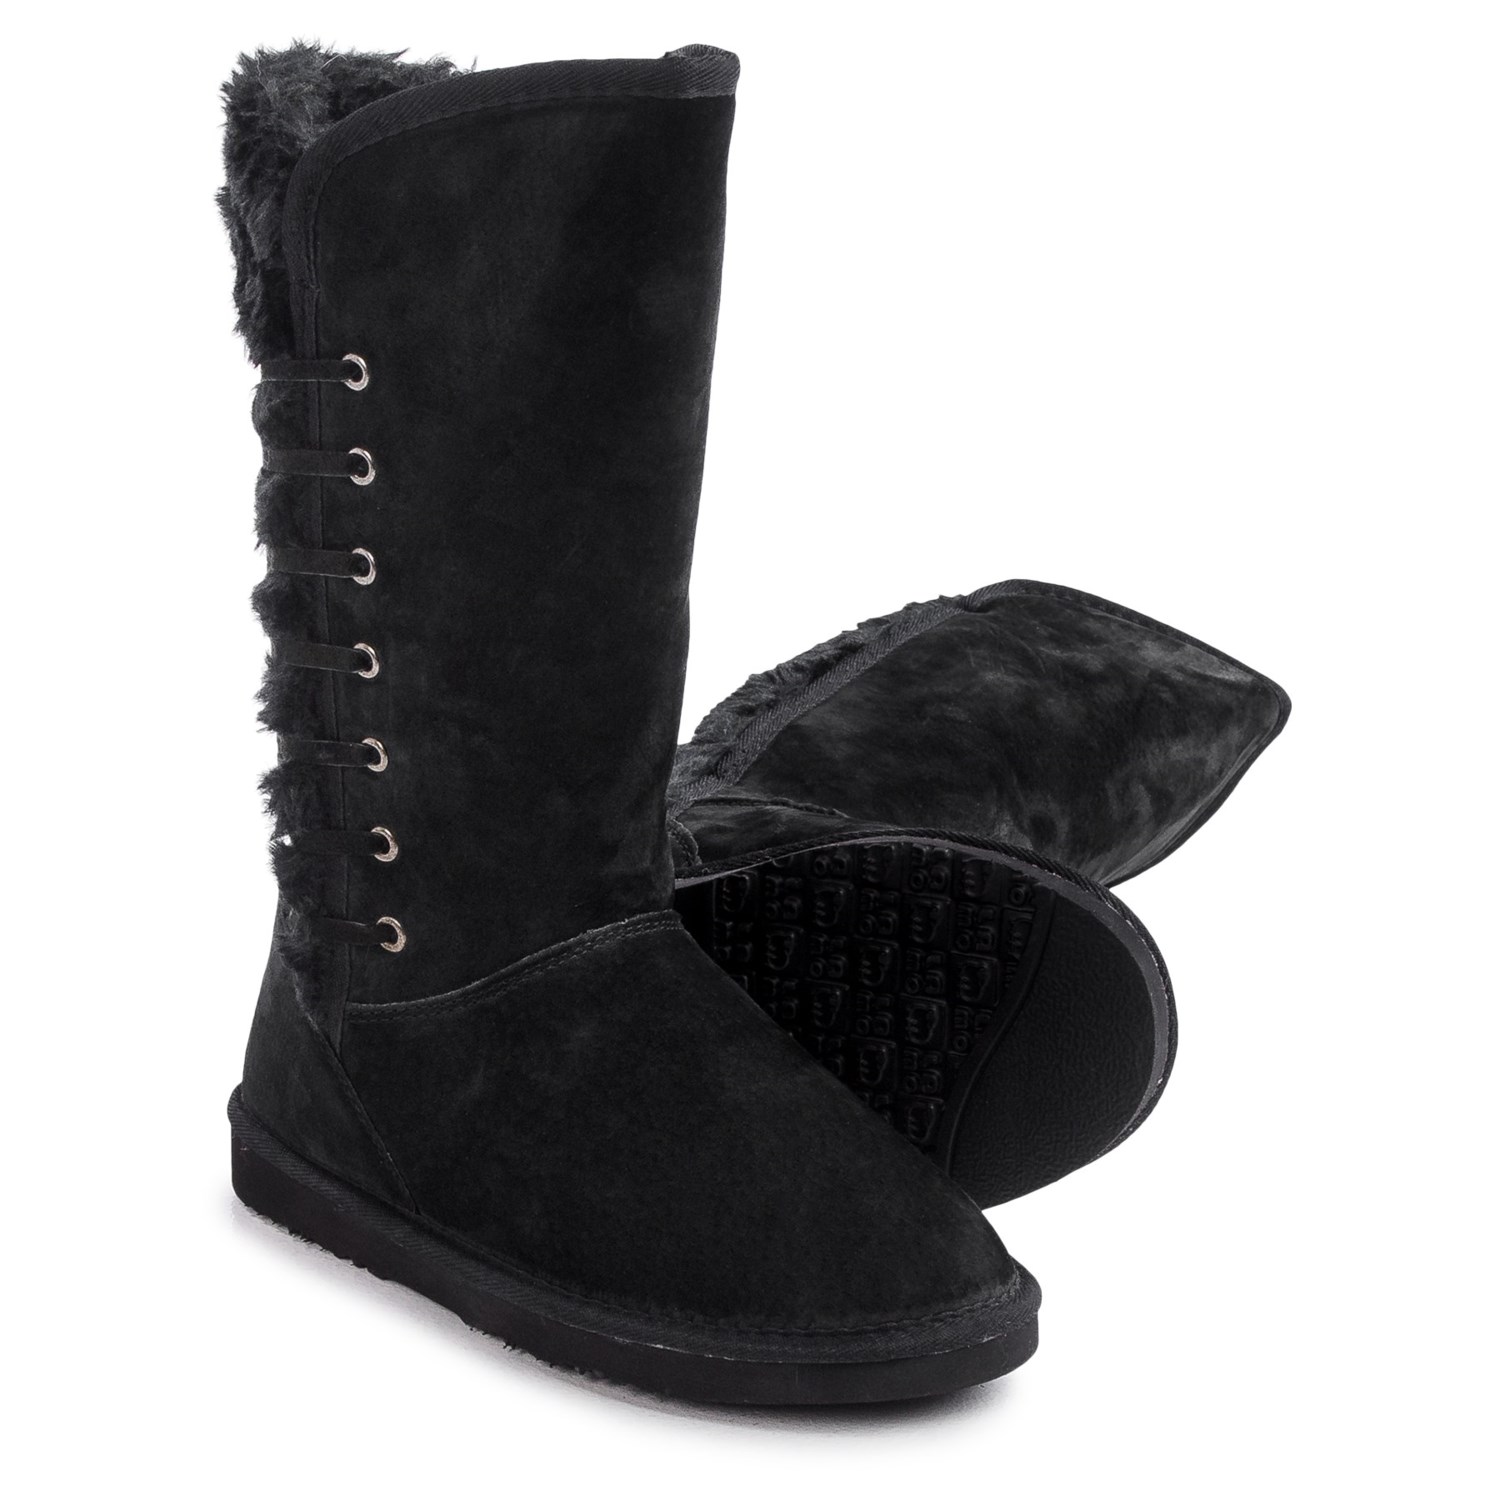 LAMO Footwear Robyn Snow Boots (For Women) - Save 55%